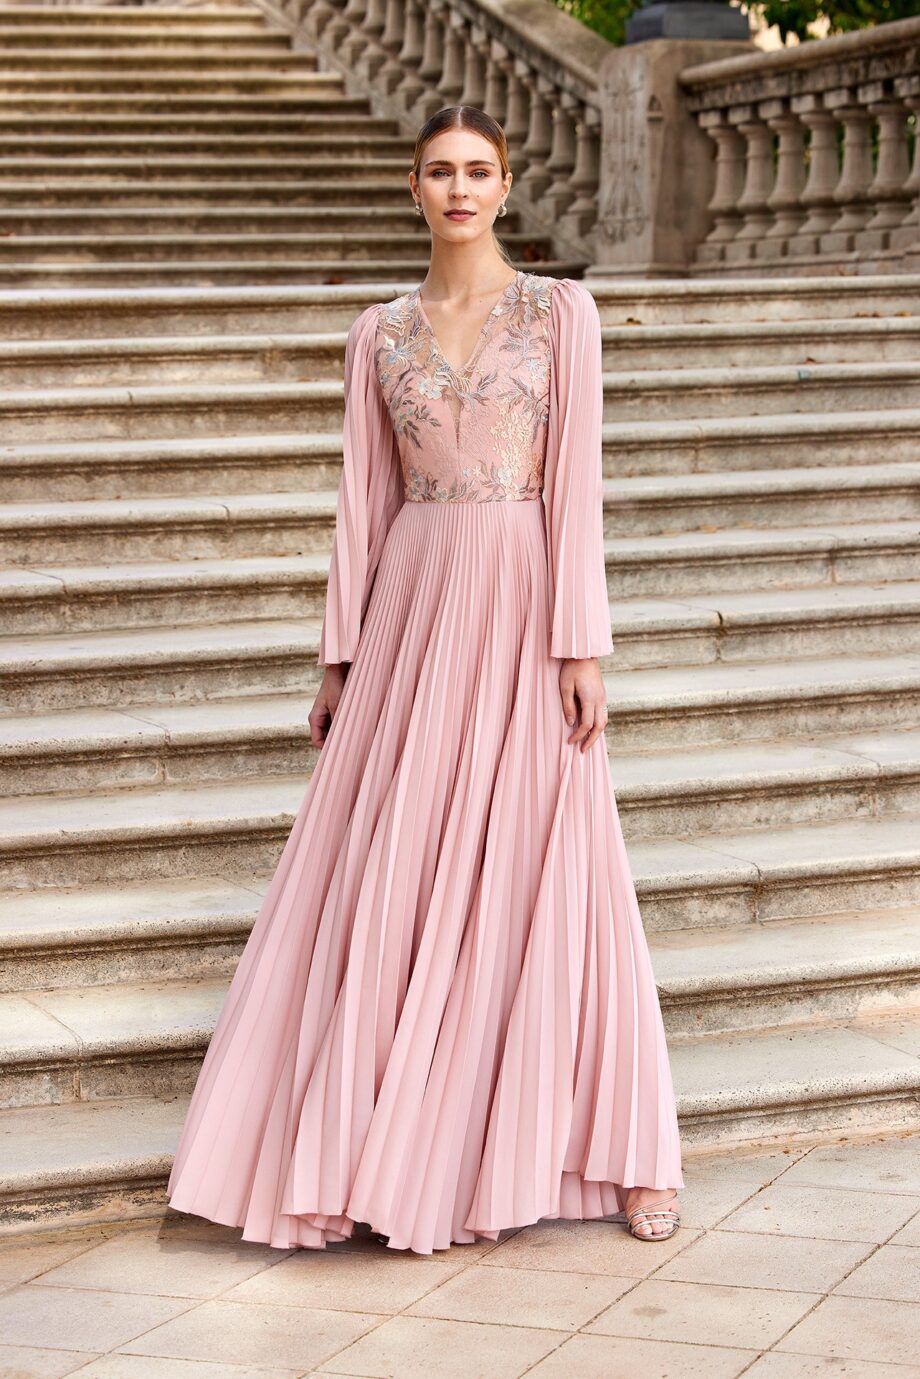 Carla-Ruiz-99596-Pleated-Dress-Embroidered-Body-Timeless-Elegance-Evening-Events-Front-View - Rofial Beauty